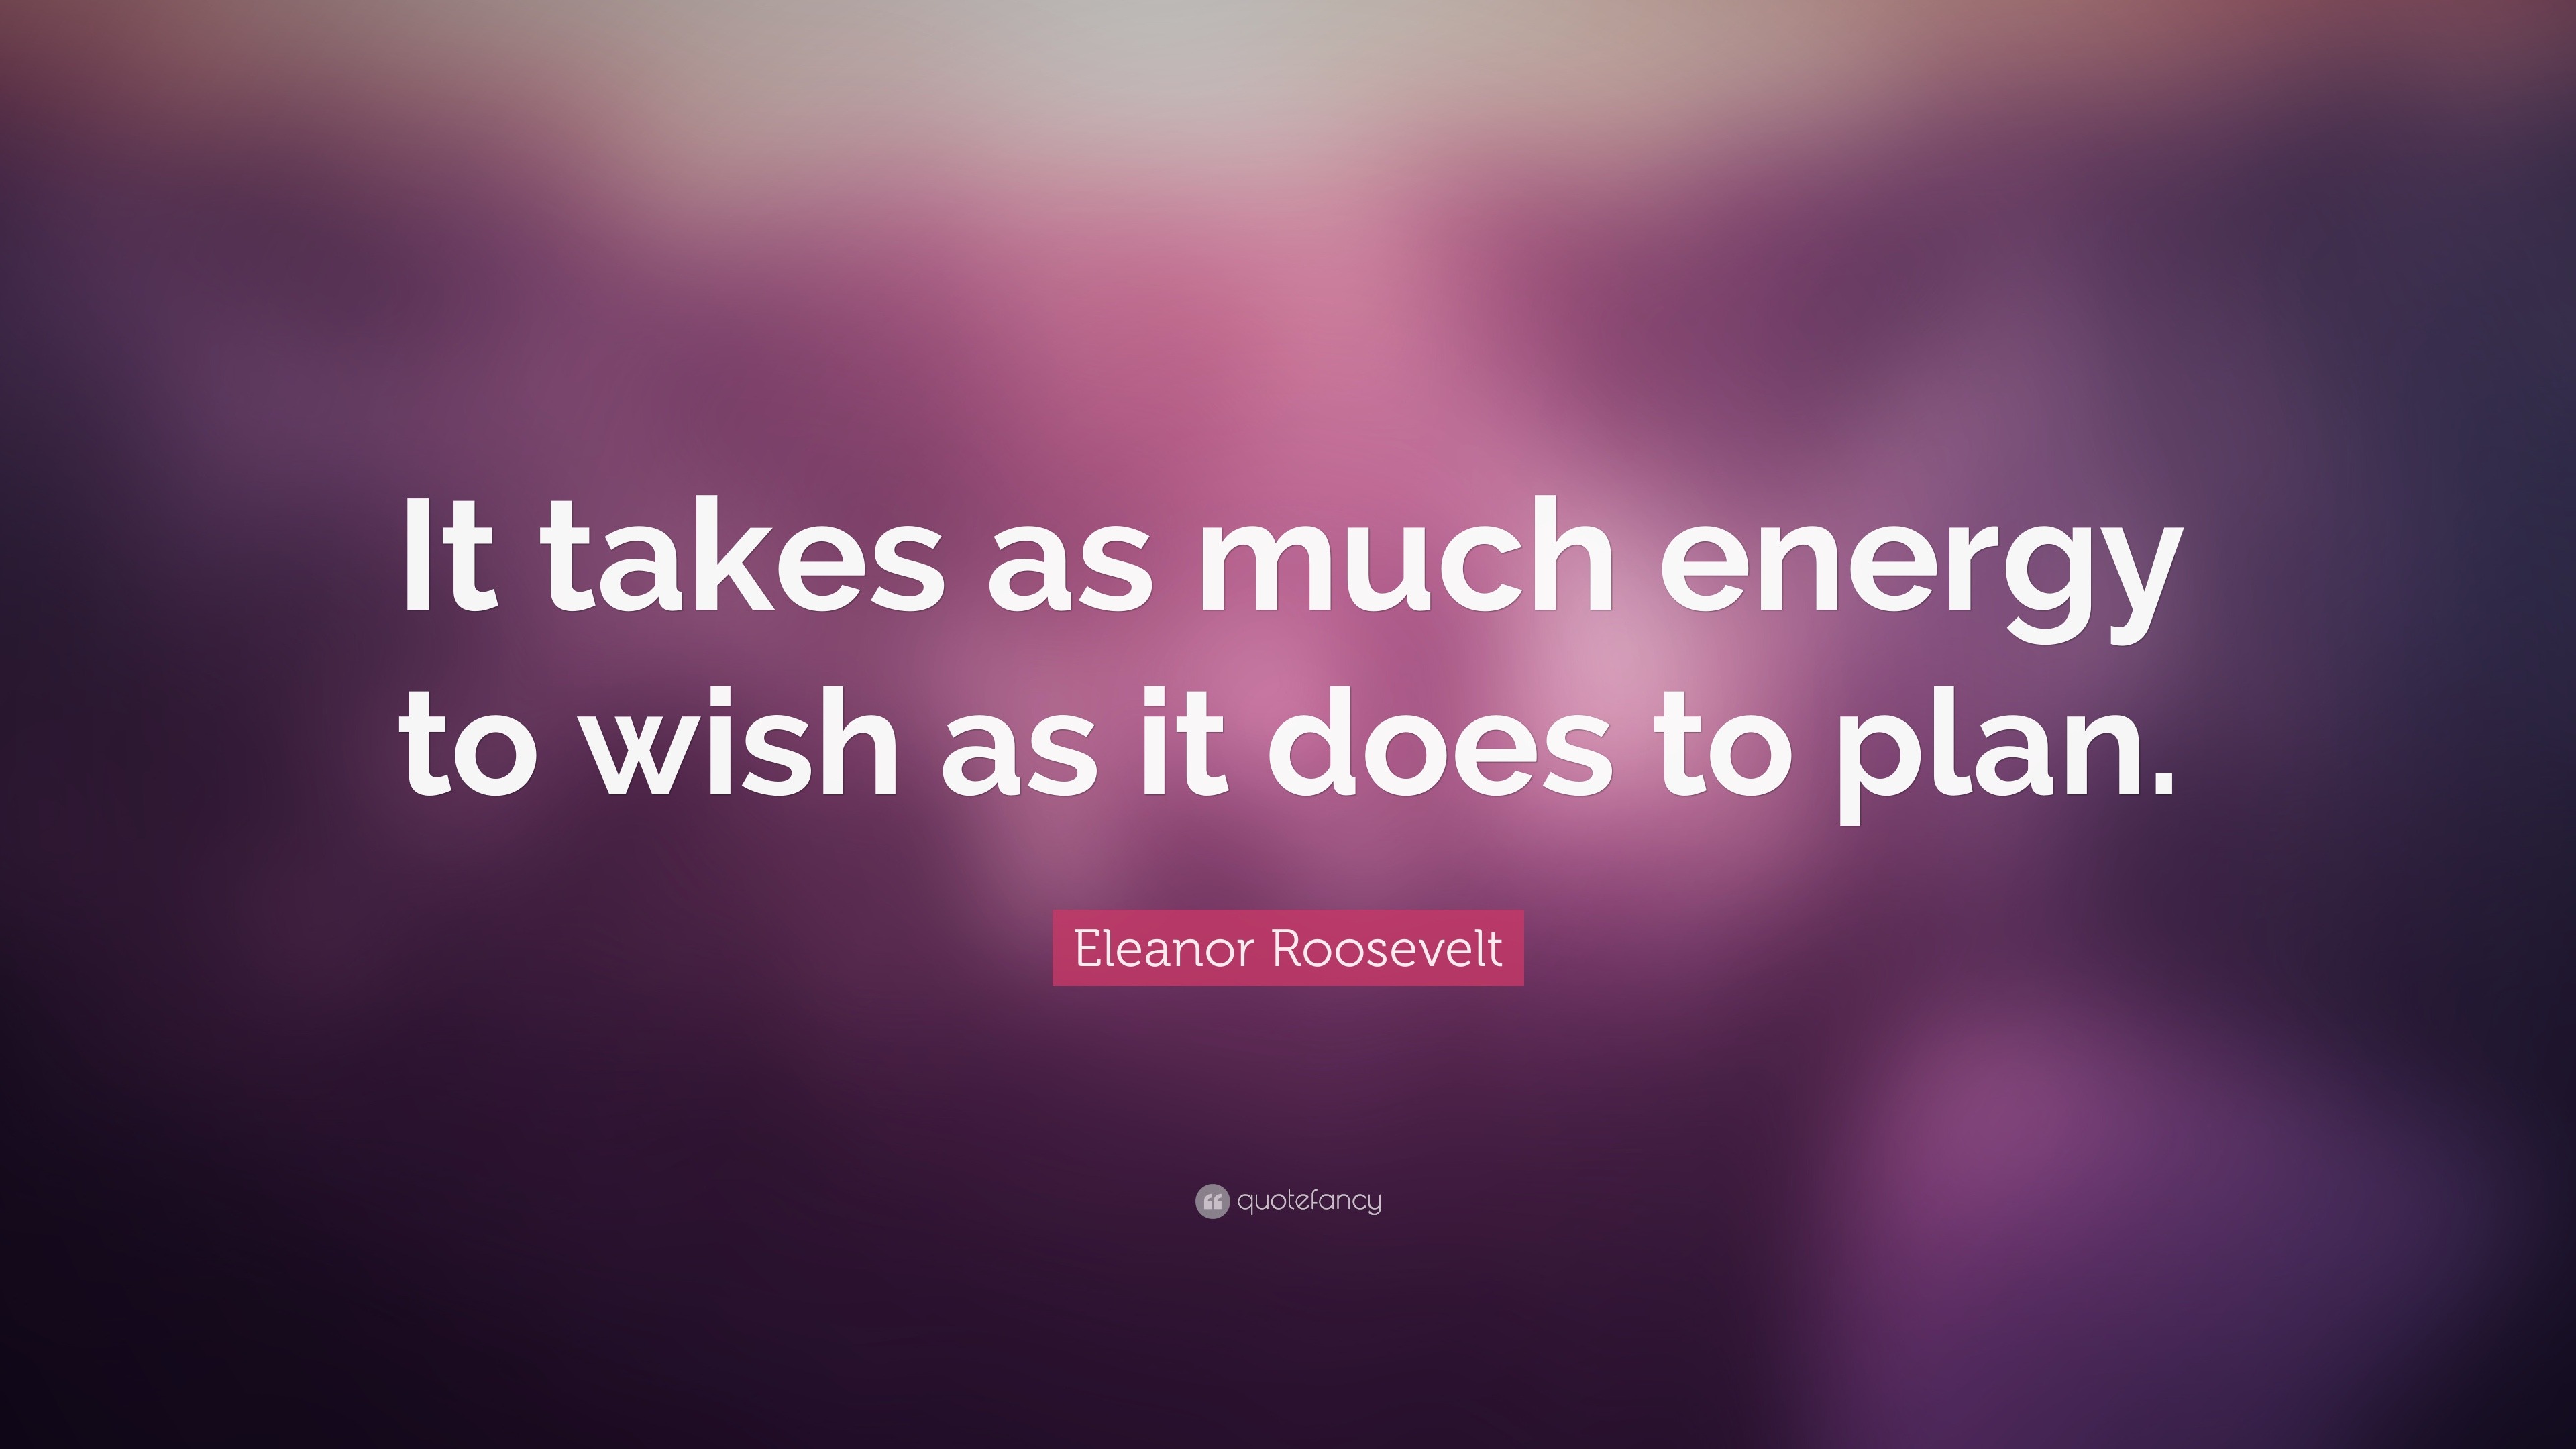 33913 Eleanor Roosevelt Quote It takes as much energy to wish as it does